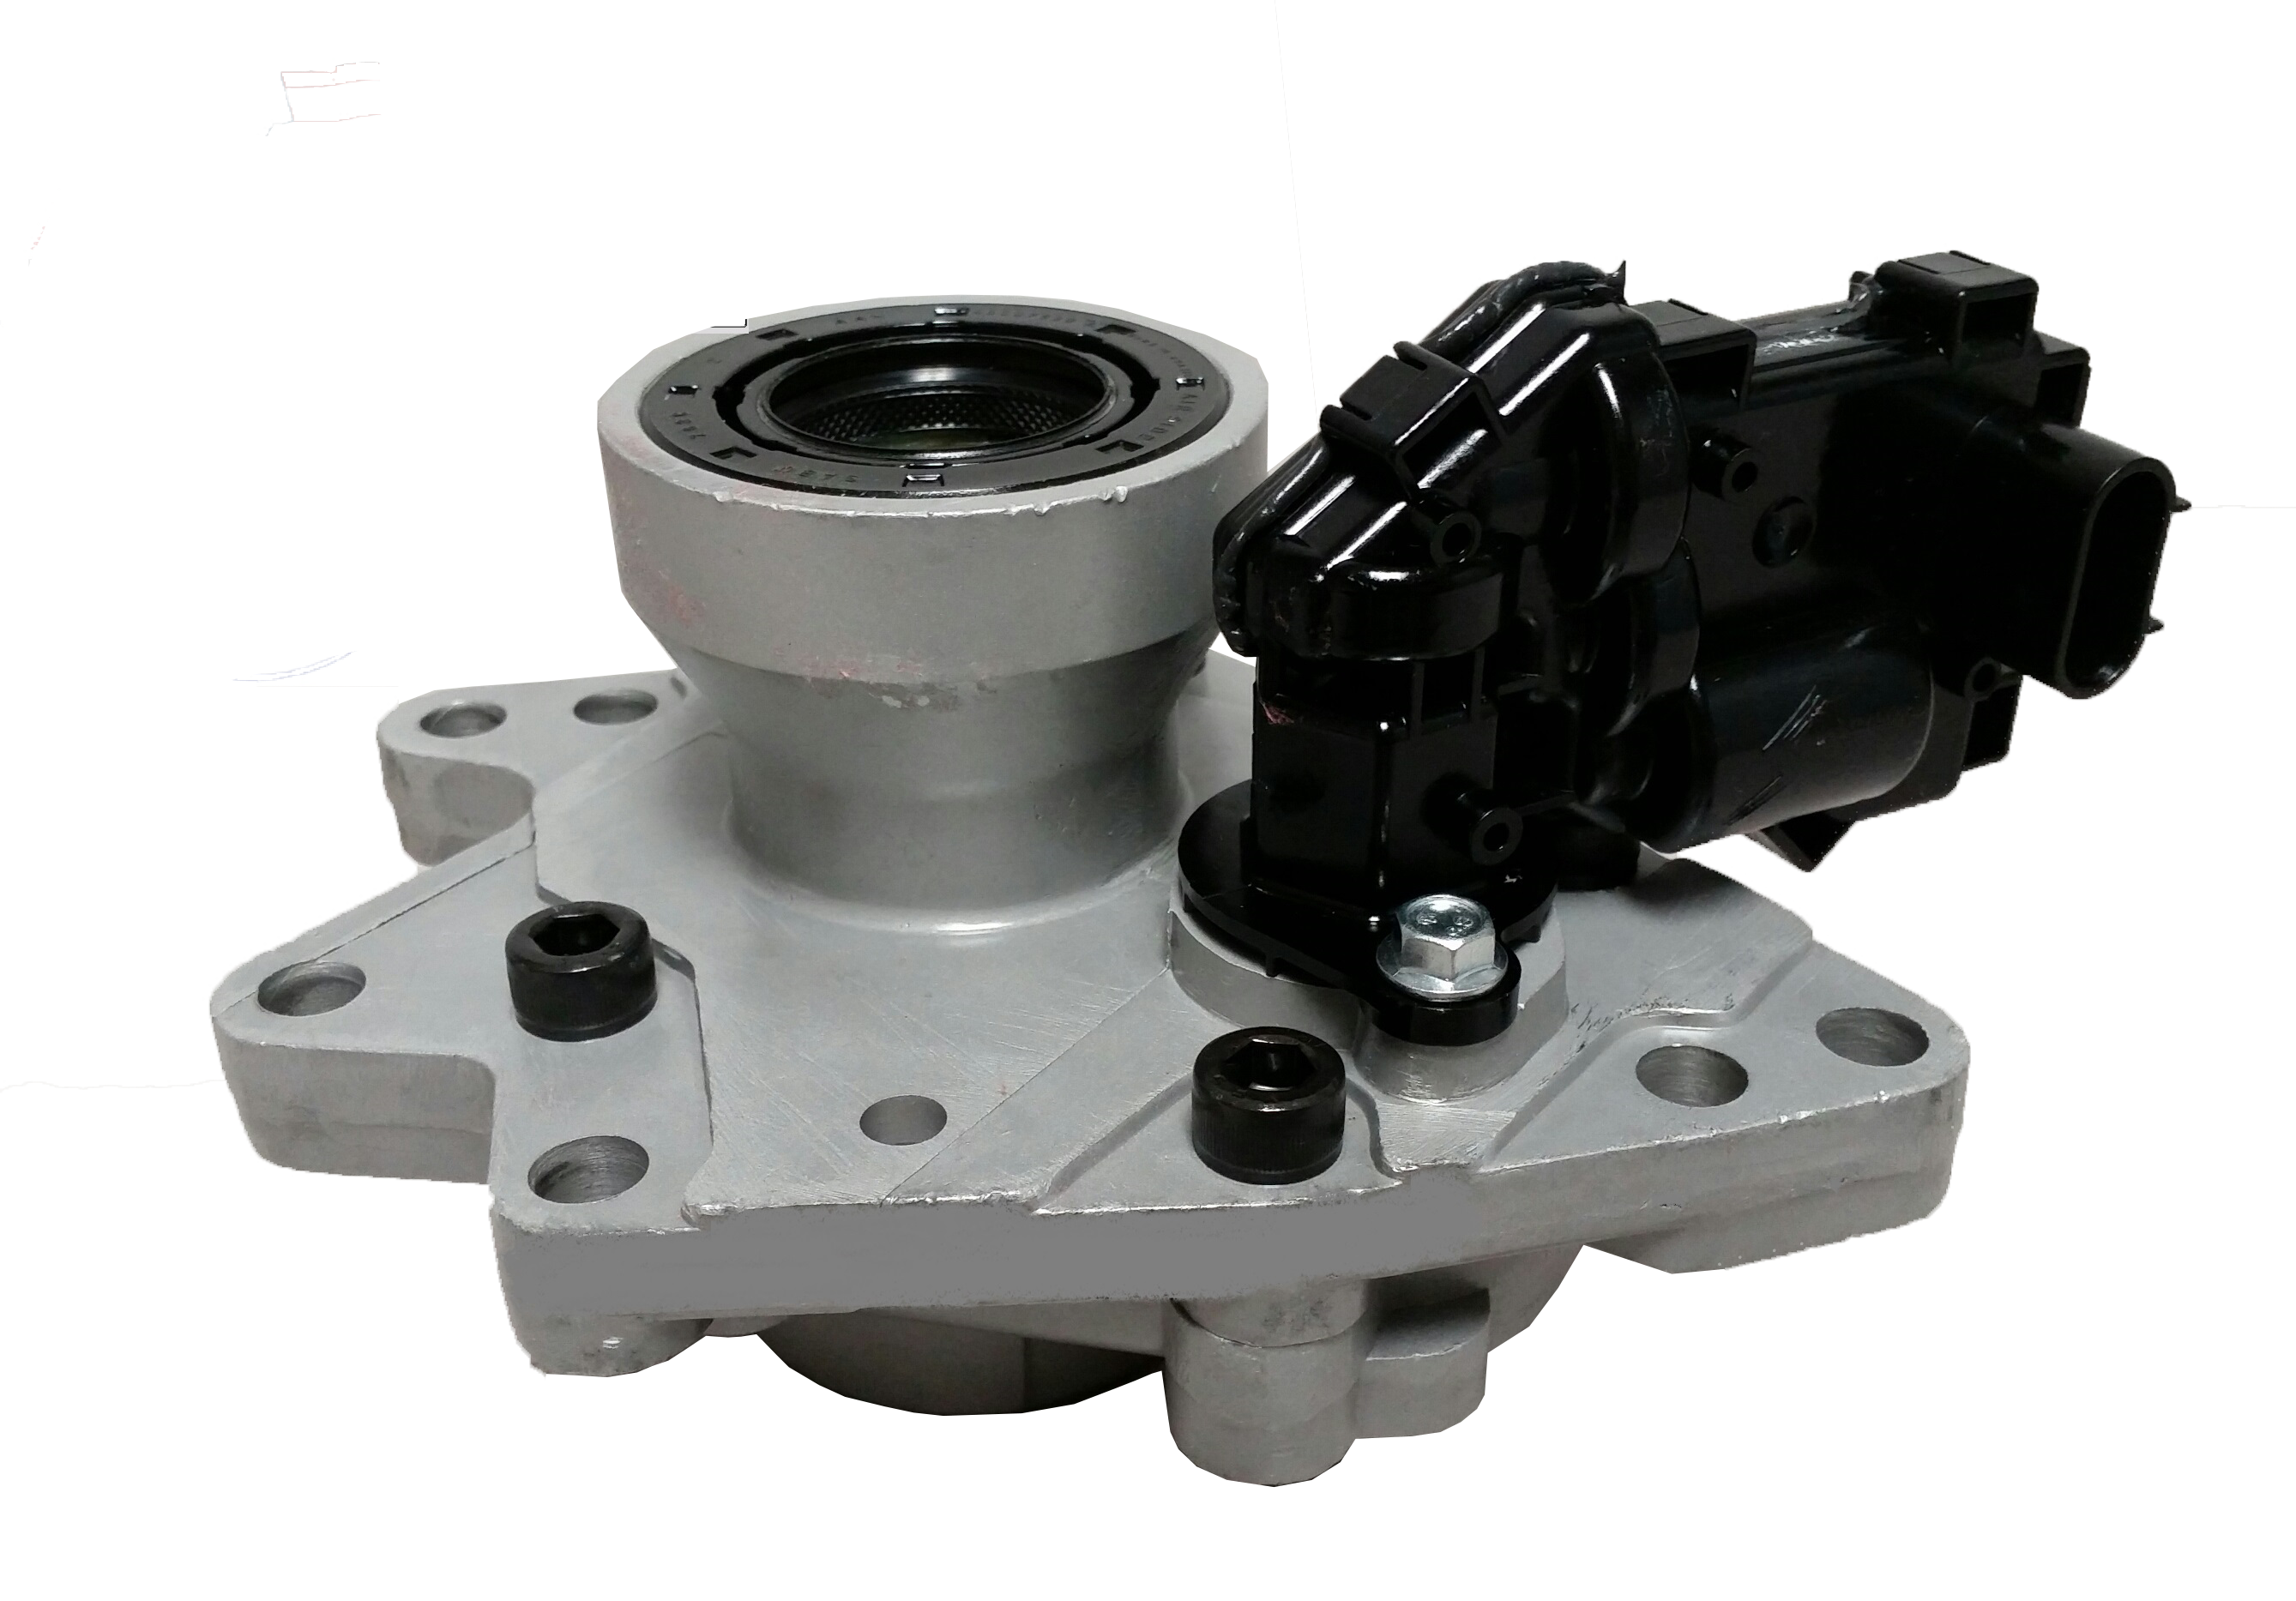 4WD Front Axle Differential Actuator and Disconnect For Chevrolet Trailblazer GMC Envoy XL XUV Isuzu Ascender Saab Buick Rainier Oldsmobile Bravada 4WD & AWD Replace #12471623 12471631 15884292 